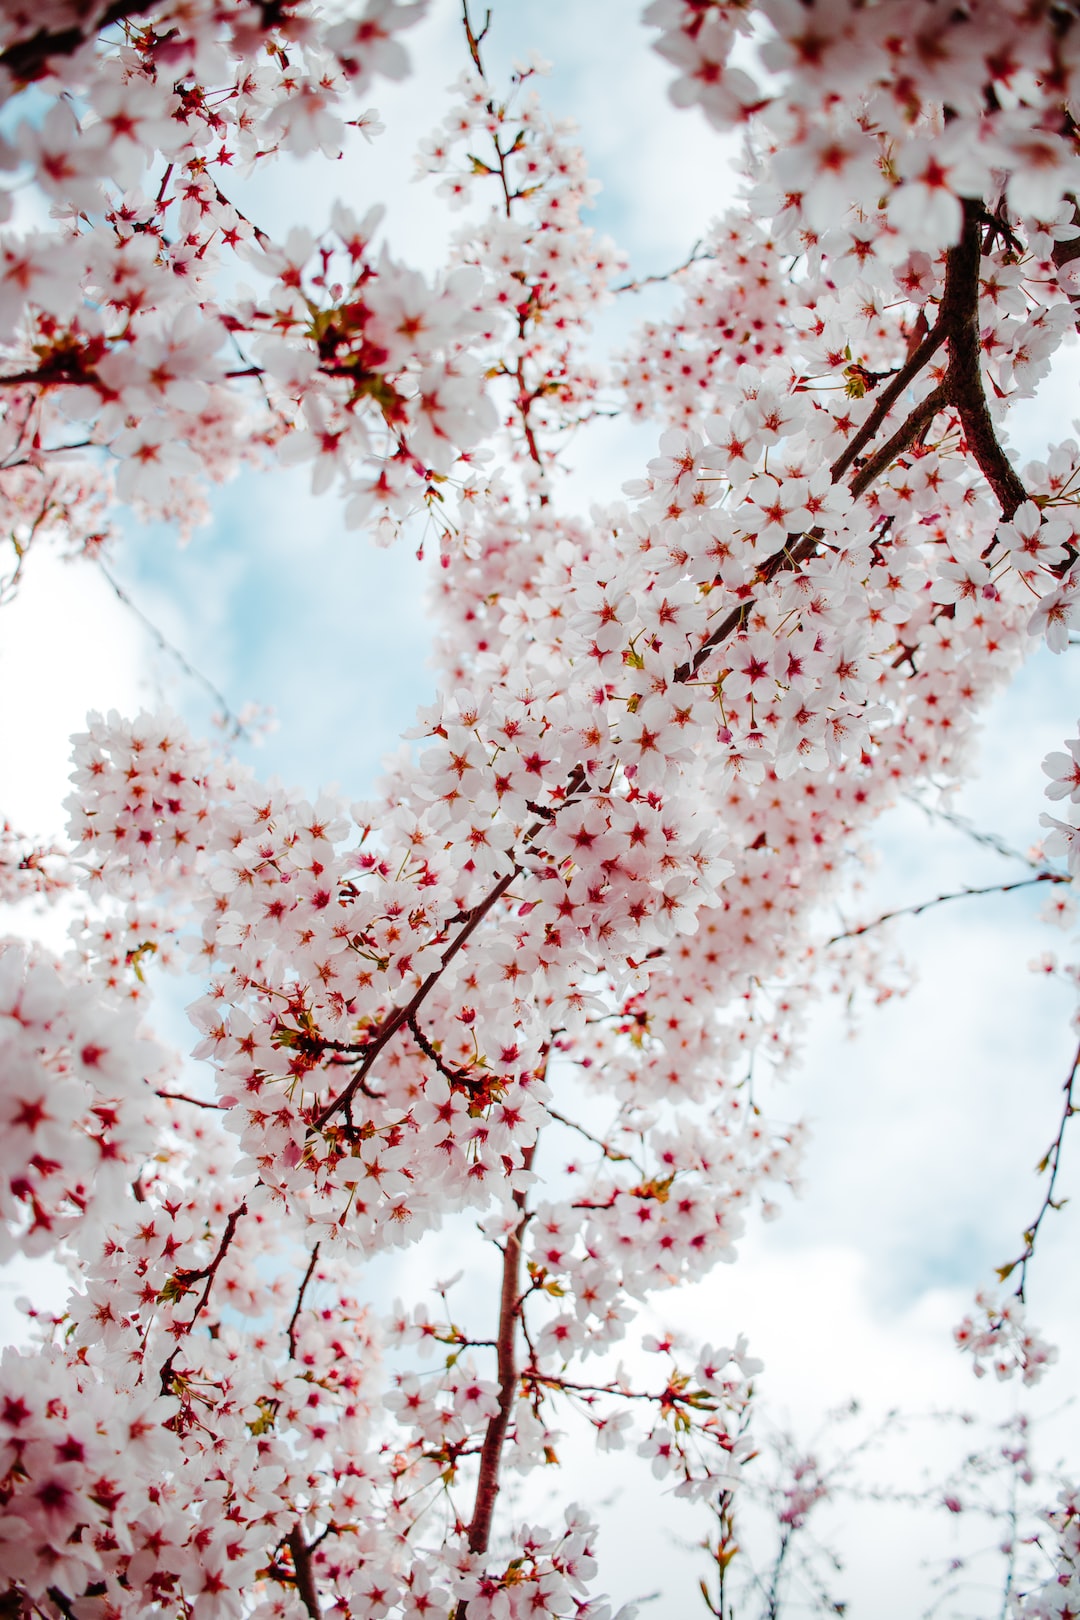 pink cherry blossom tree under white clouds and blue sky during daytime